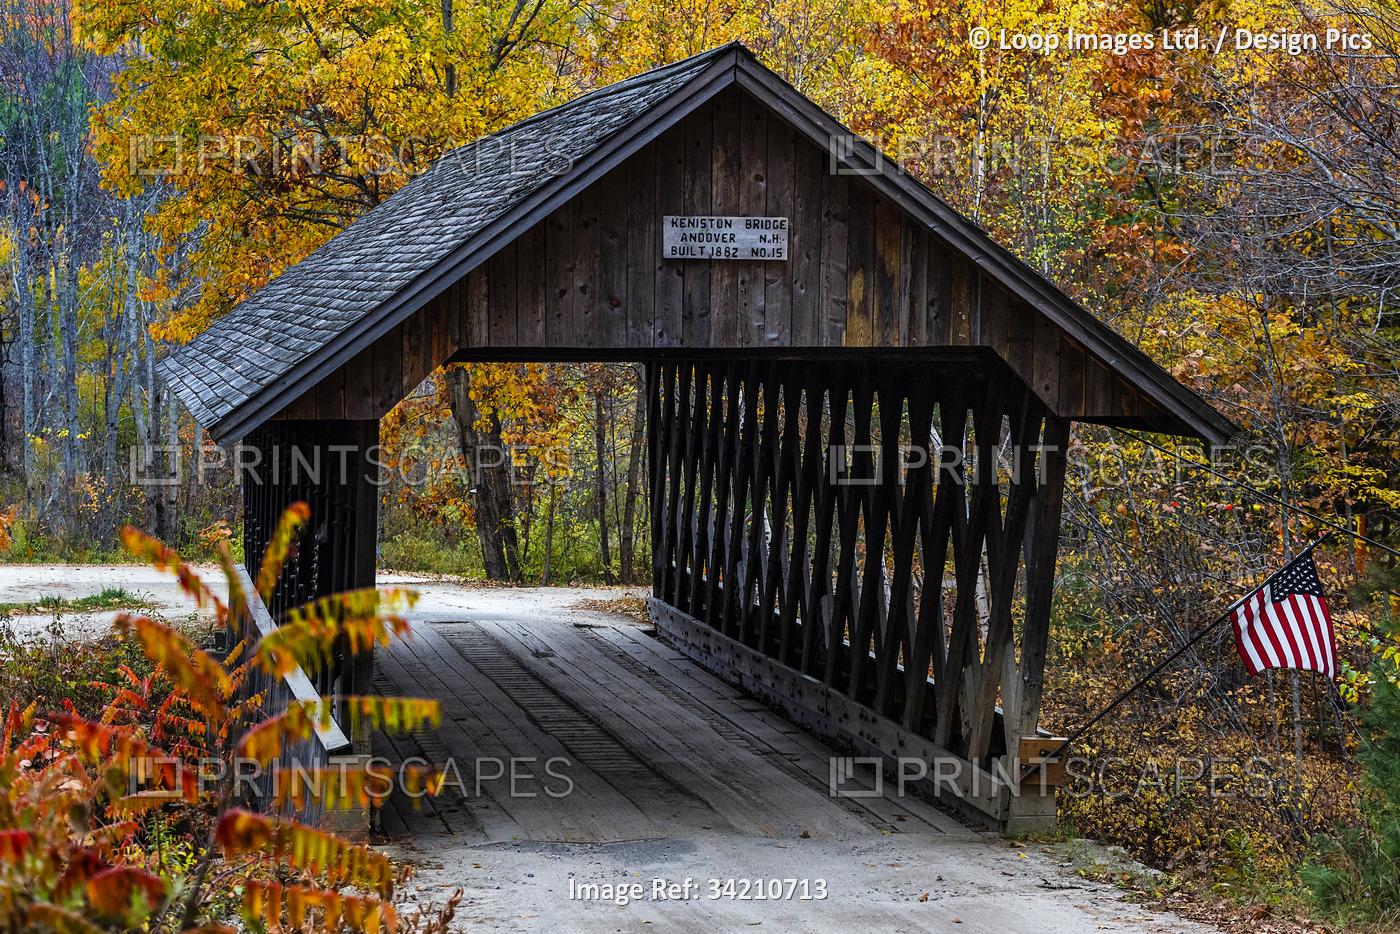 Keniston Covered Bridge at Andover in New Hampshire.